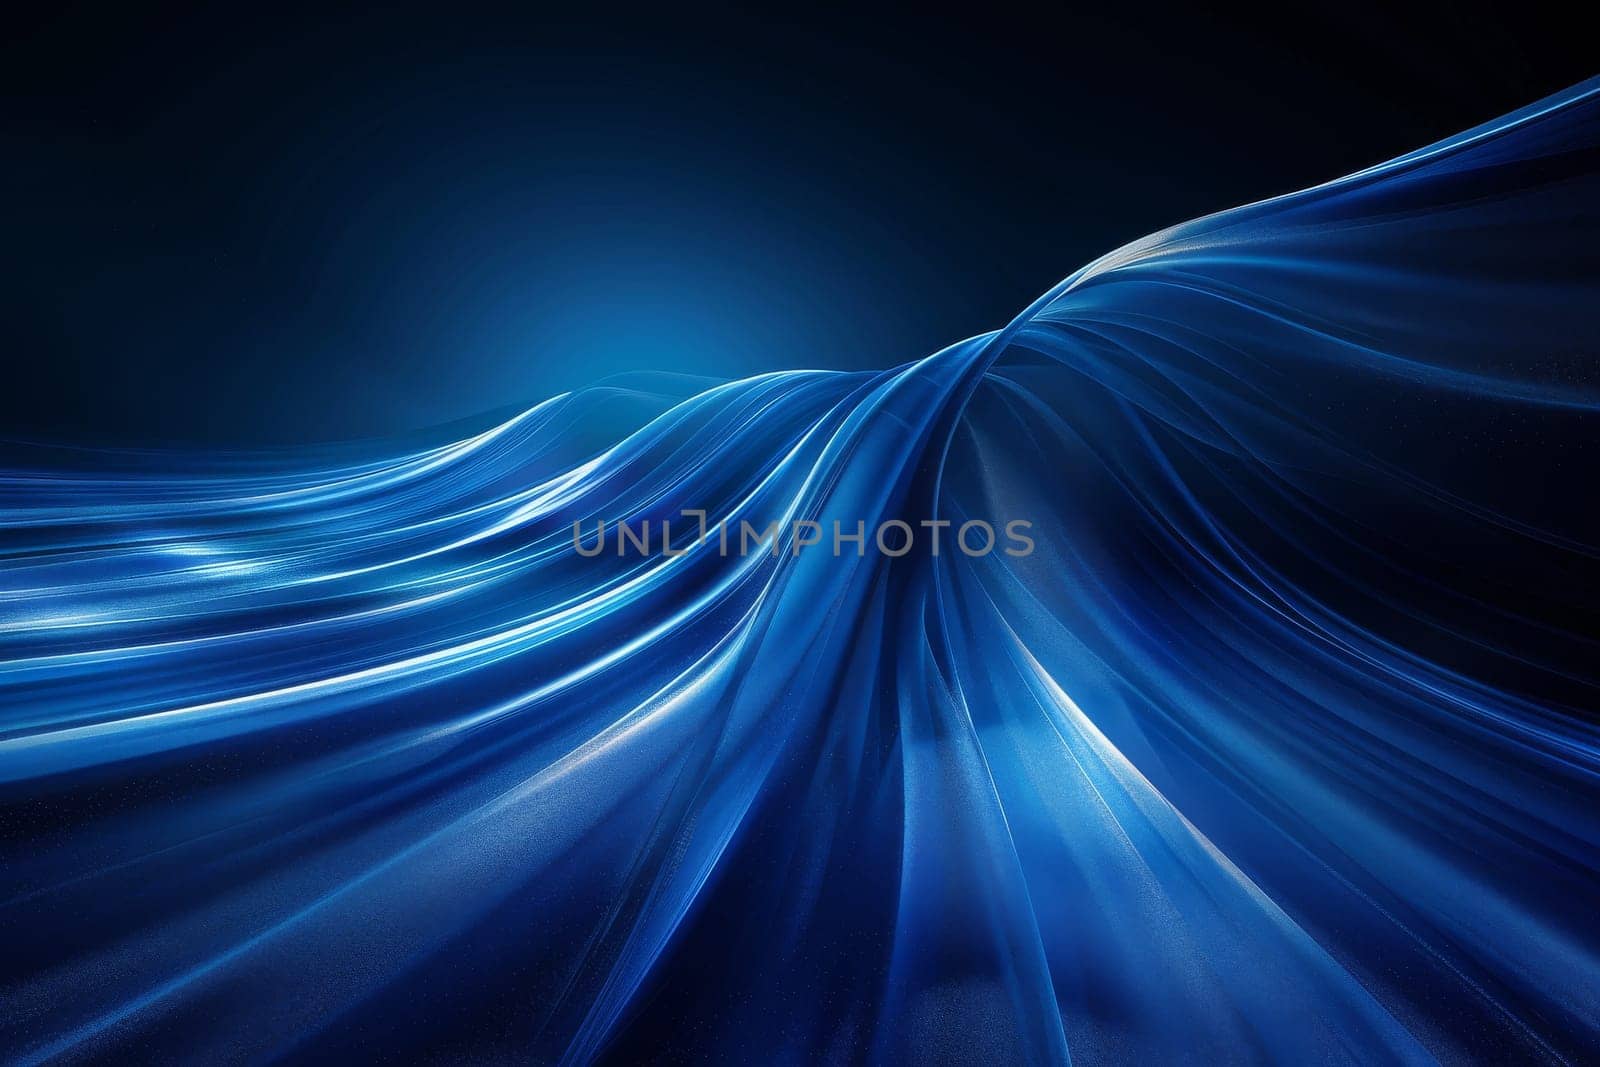 A blue wave of light is projected onto a dark background. Concept of movement and energy, as if the light is flowing through the air. The blue color of the wave adds a calming